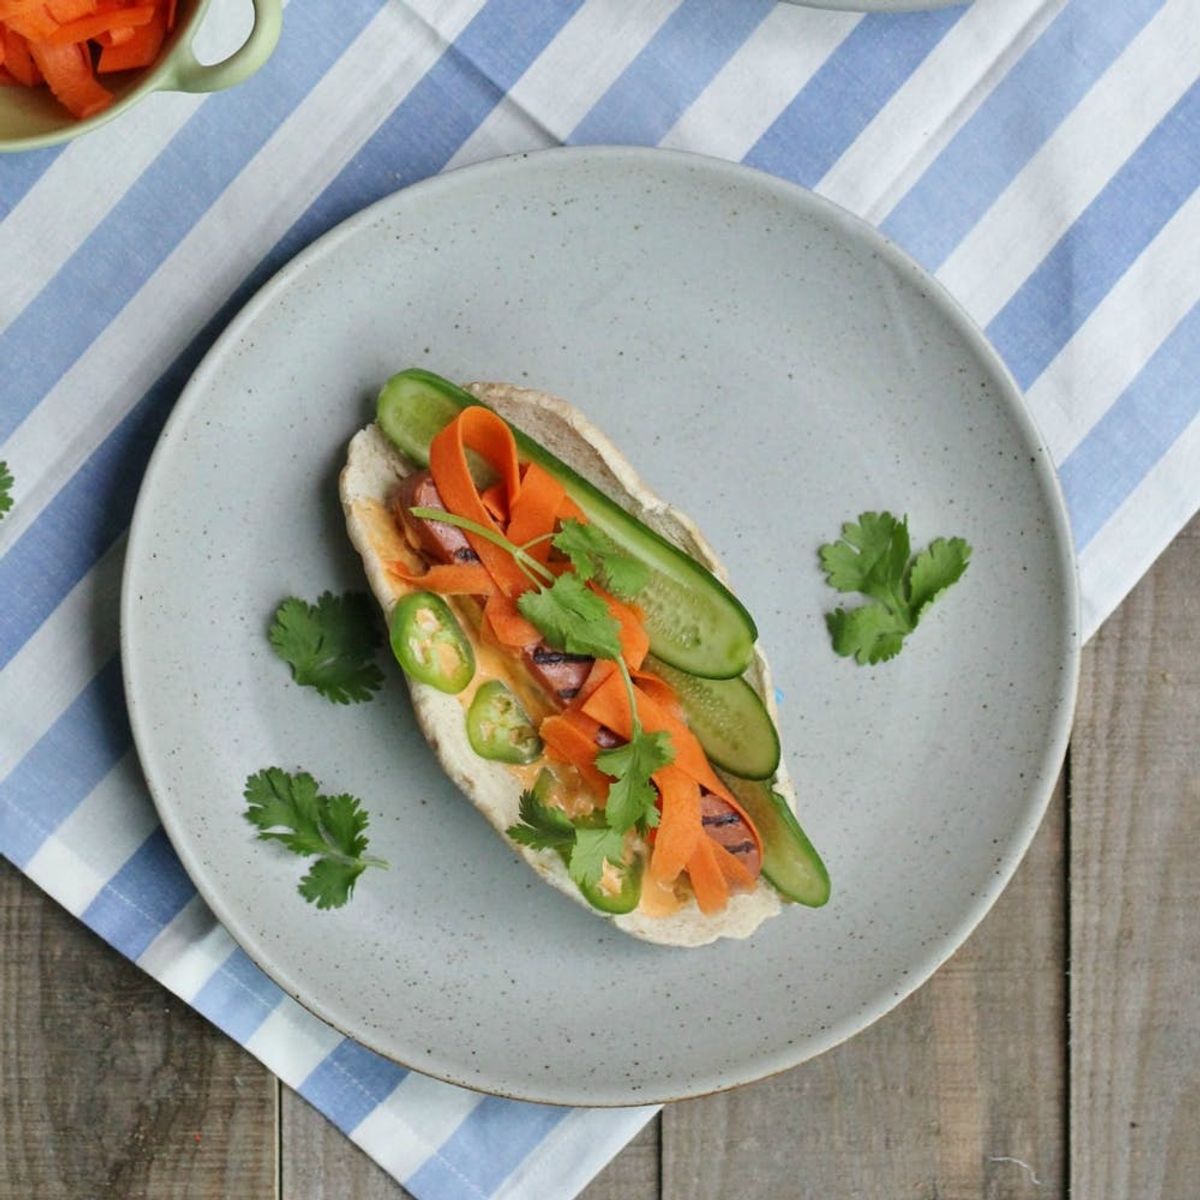 12 Veggie Hot Dog Recipes for Your Next Cookout